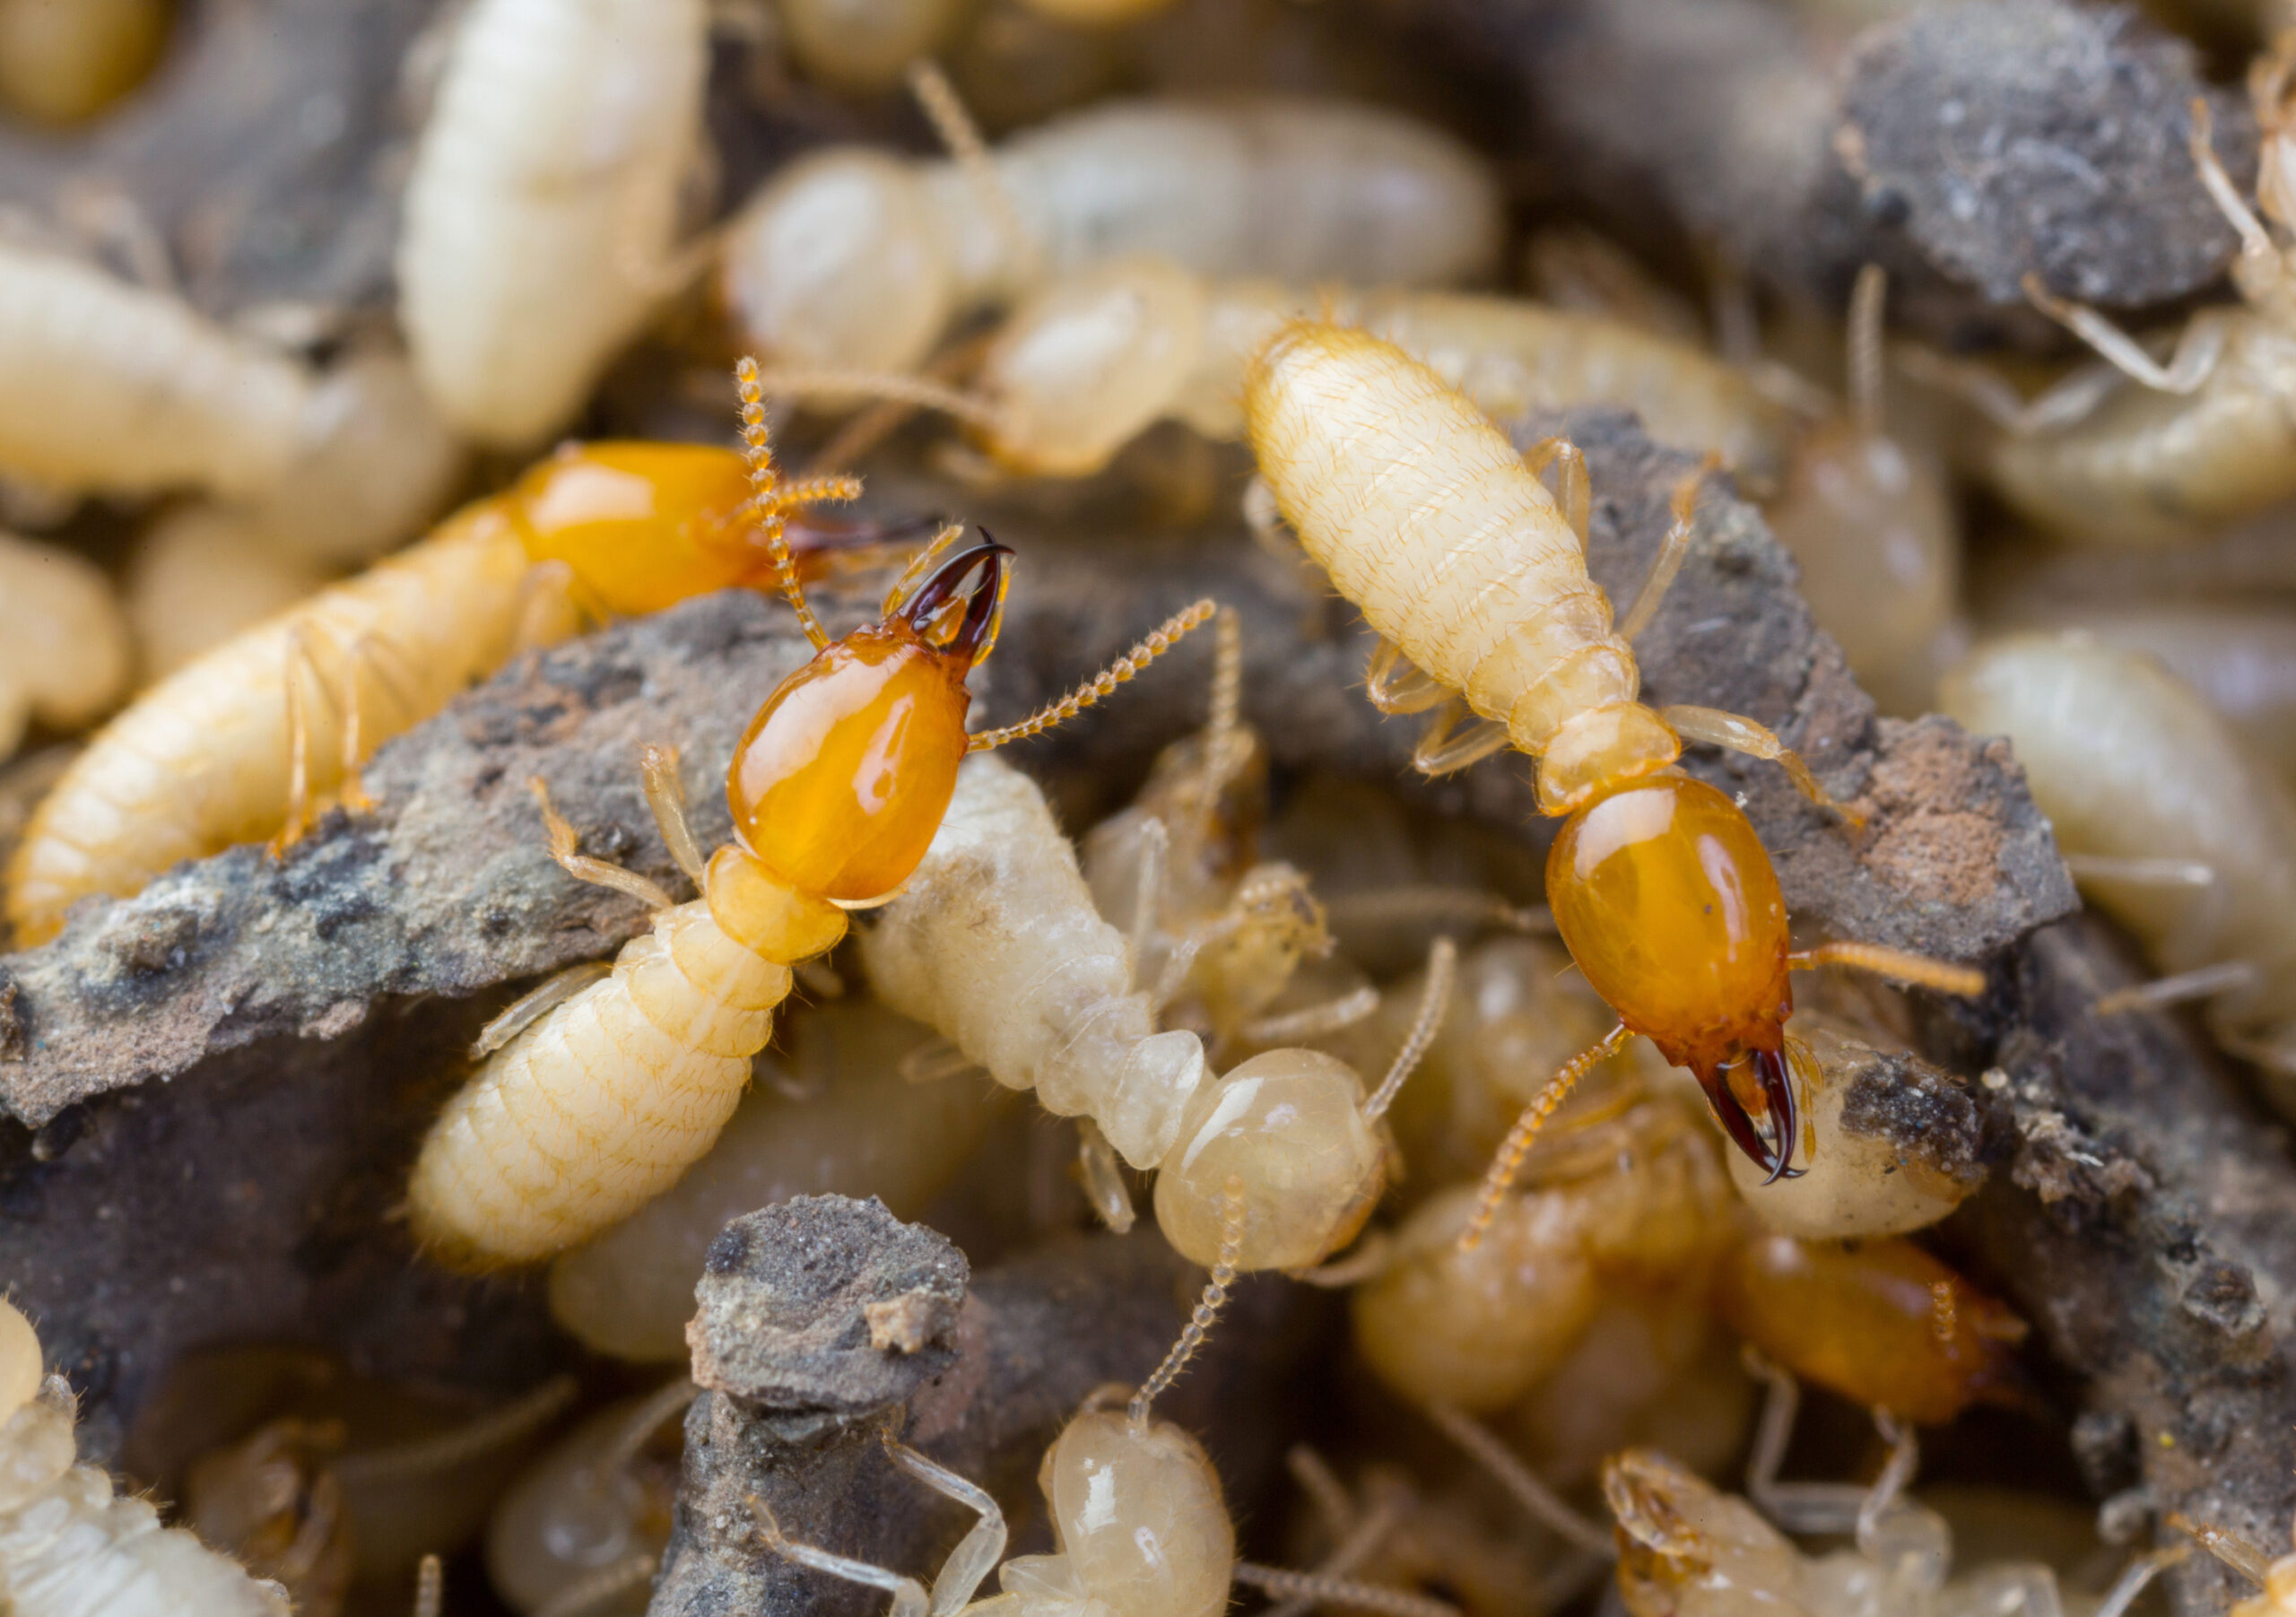 How to treat termites? Can we do termite treatment ourselves?